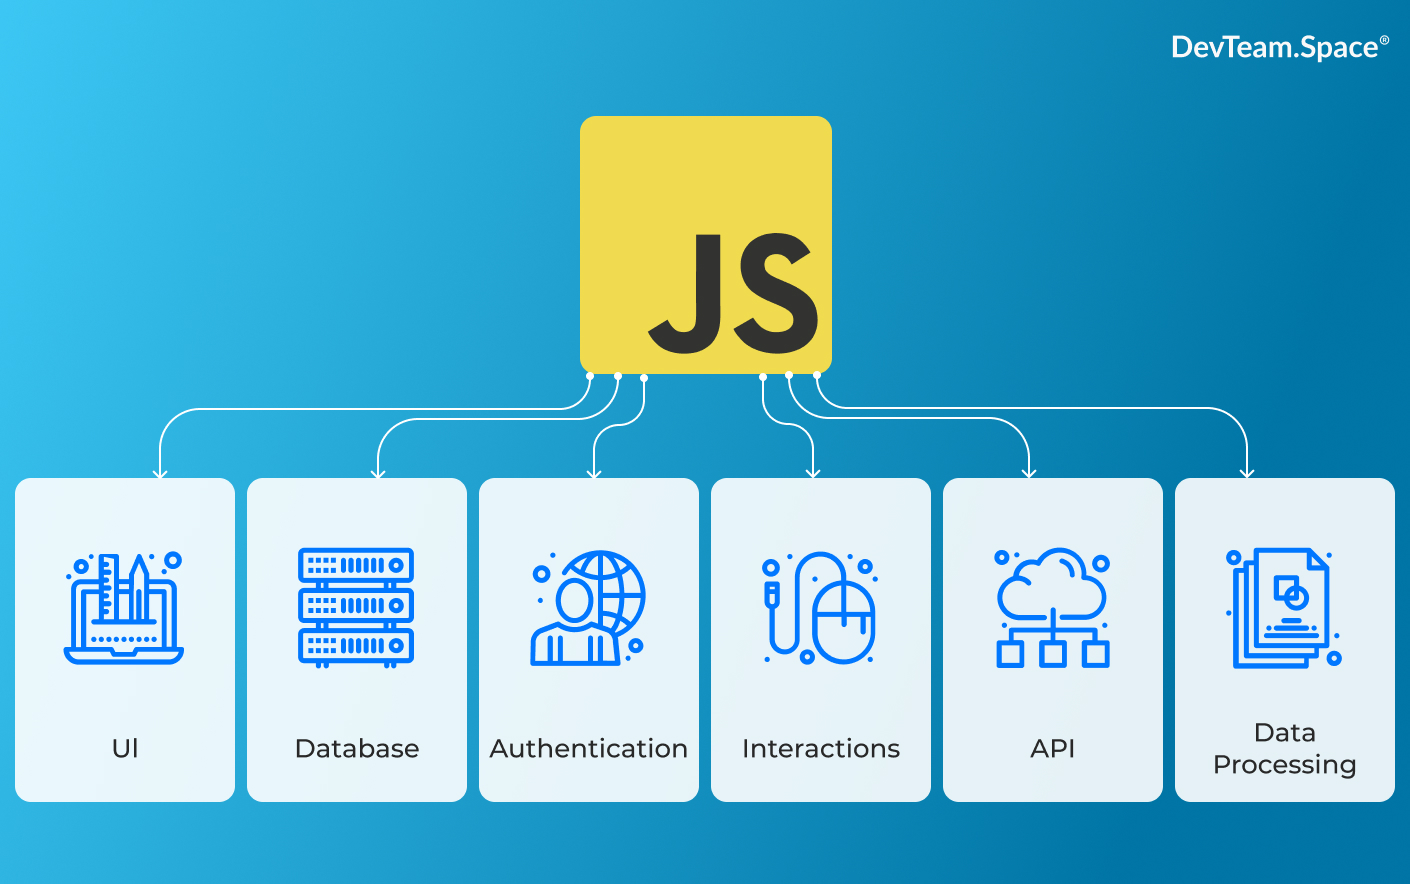 An image showing the JavaScript programming language logo and a schematic presentation of JavaScript use cases in software development (UI, databases, authentication, interactions, APIs, data processing). 